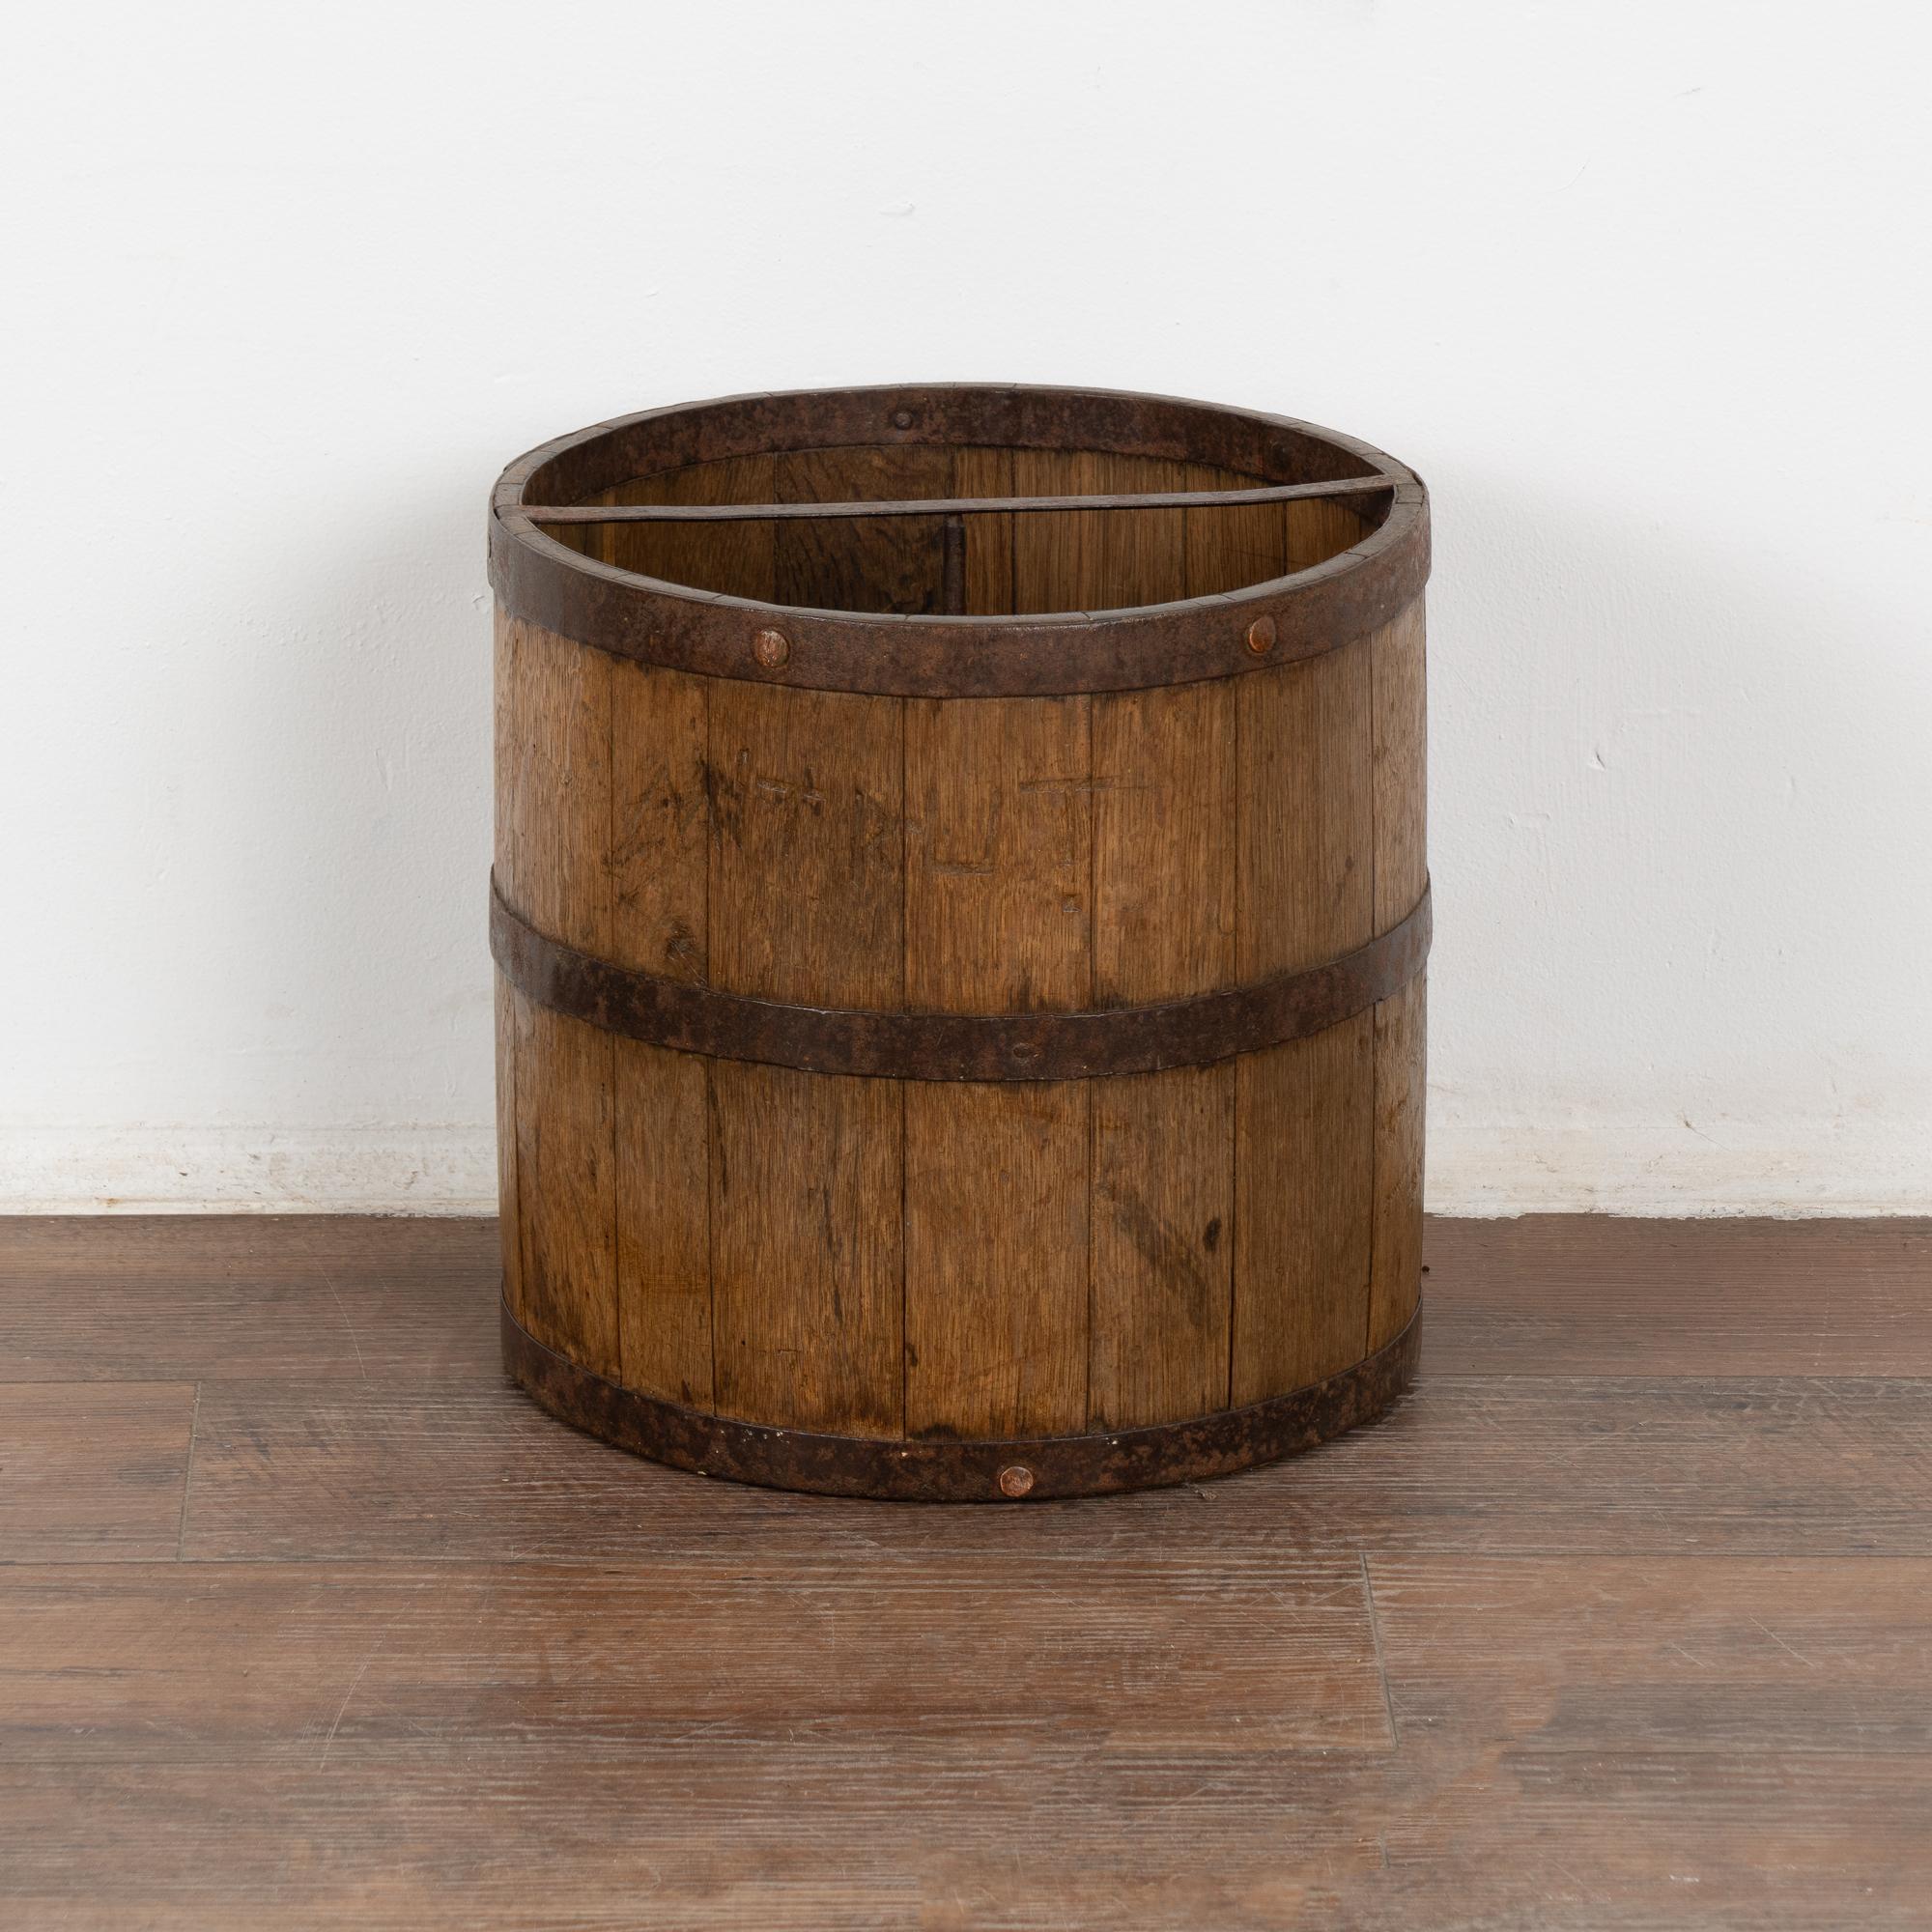 Oak Measuring Bucket with Metal Bands, Hungary circa 1920 For Sale 1